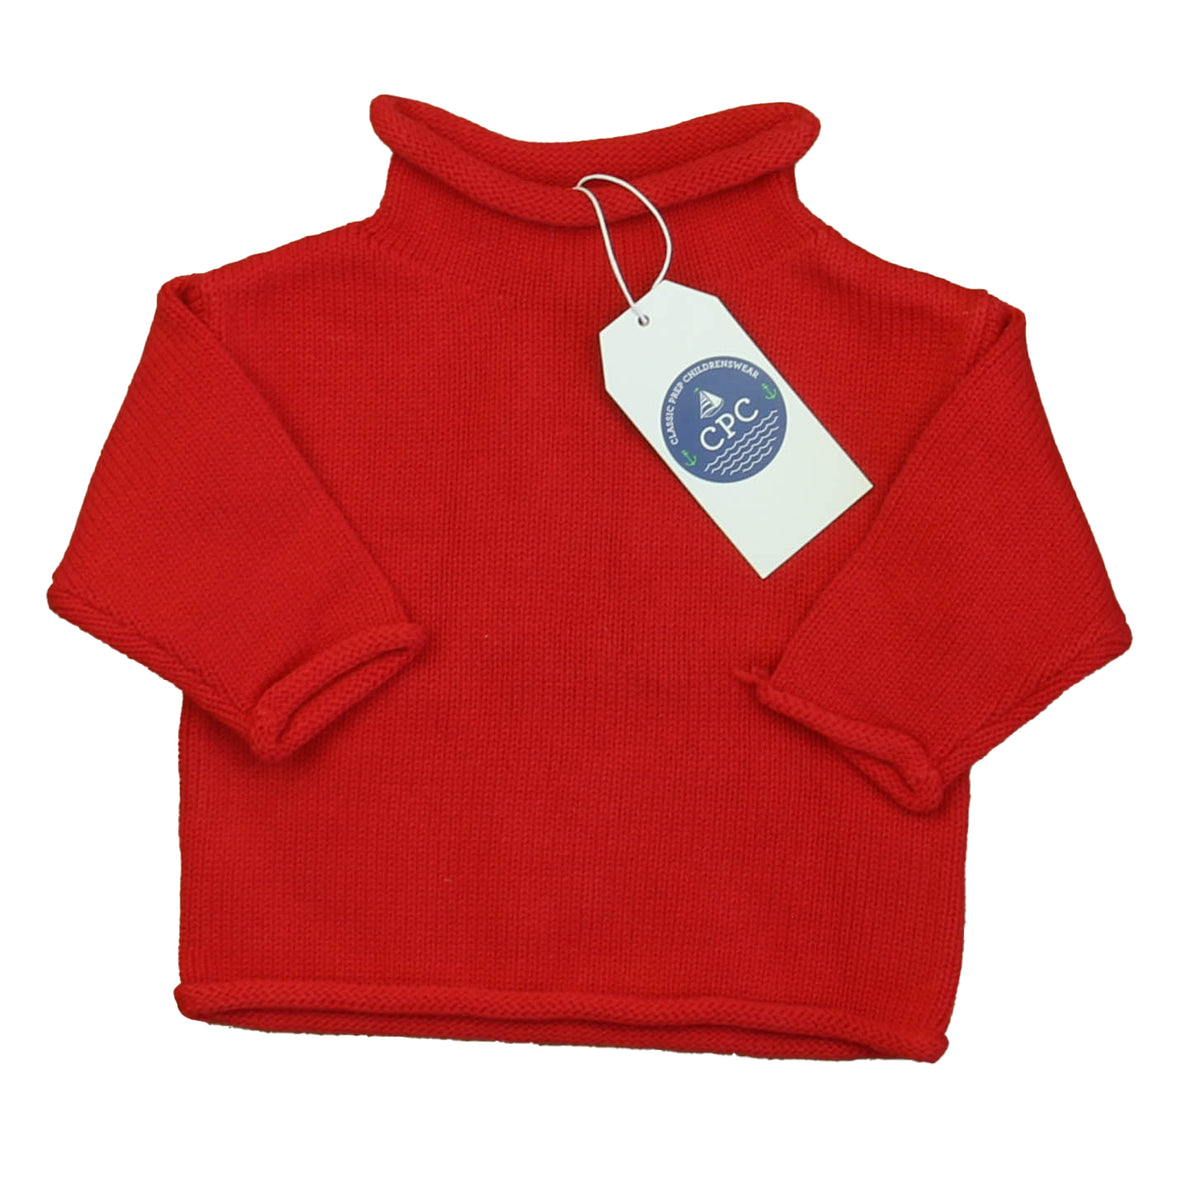 New with Tags: Red Sweater size: 9-12 Months -- FINAL SALE